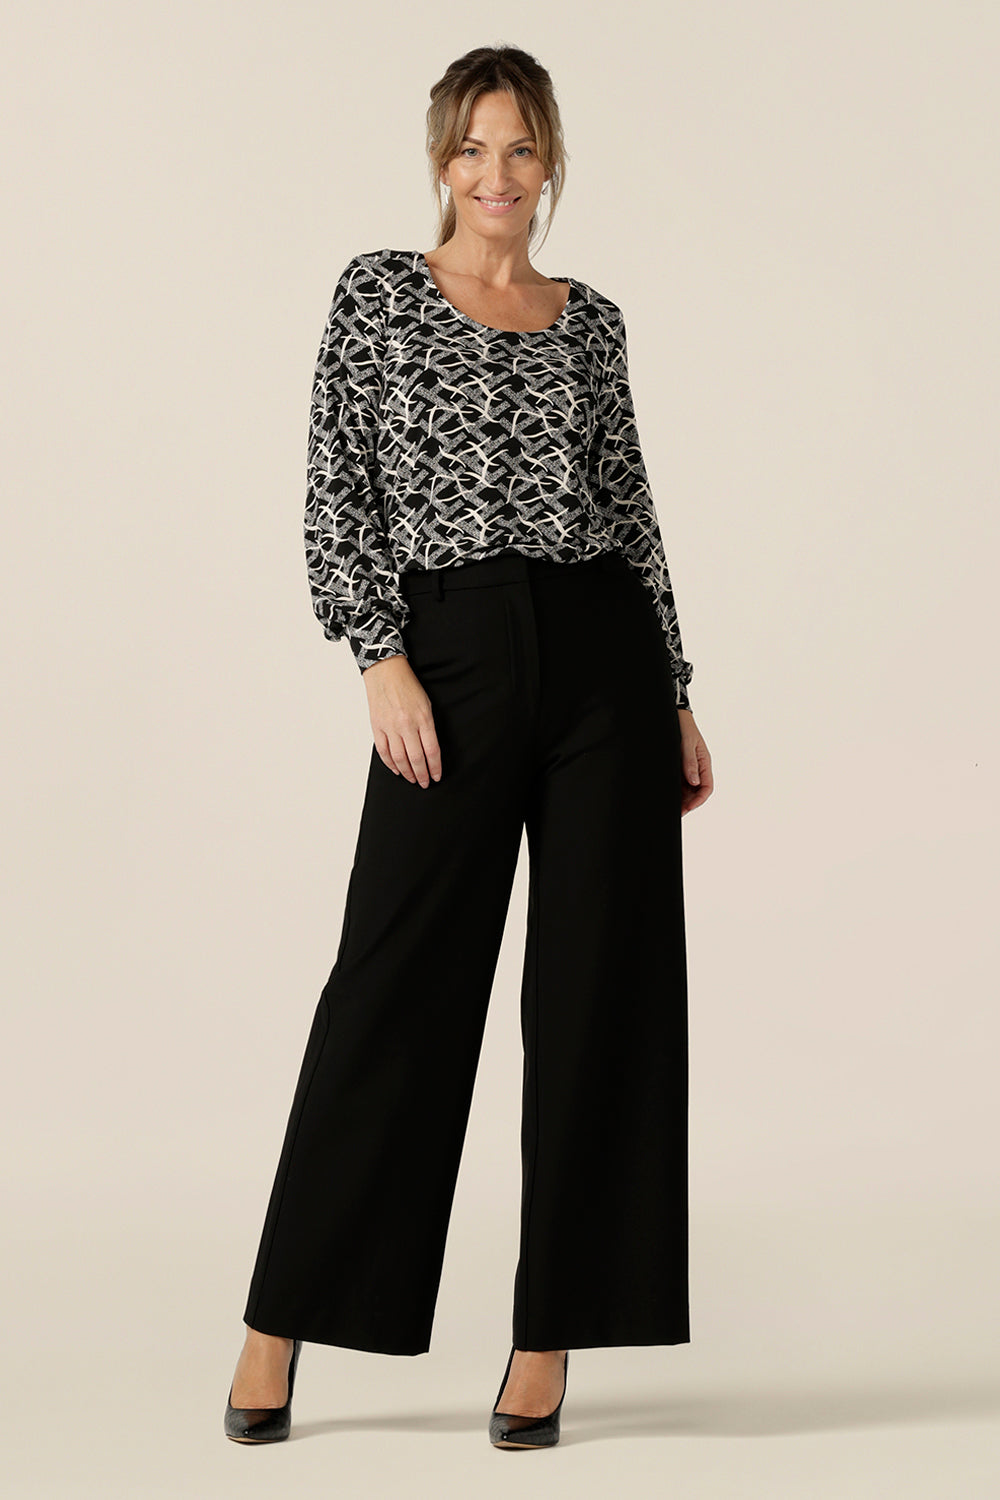 A size 10 woman wears a long sleeve top with bishop sleeve cuffs and a scoop neck in black and white print jersey. with tailored, wide leg black pants. Made in Australia by Australian and New Zealand women's clothing brand, L&F this women's work top is available to shop in sizes 8 to 24.